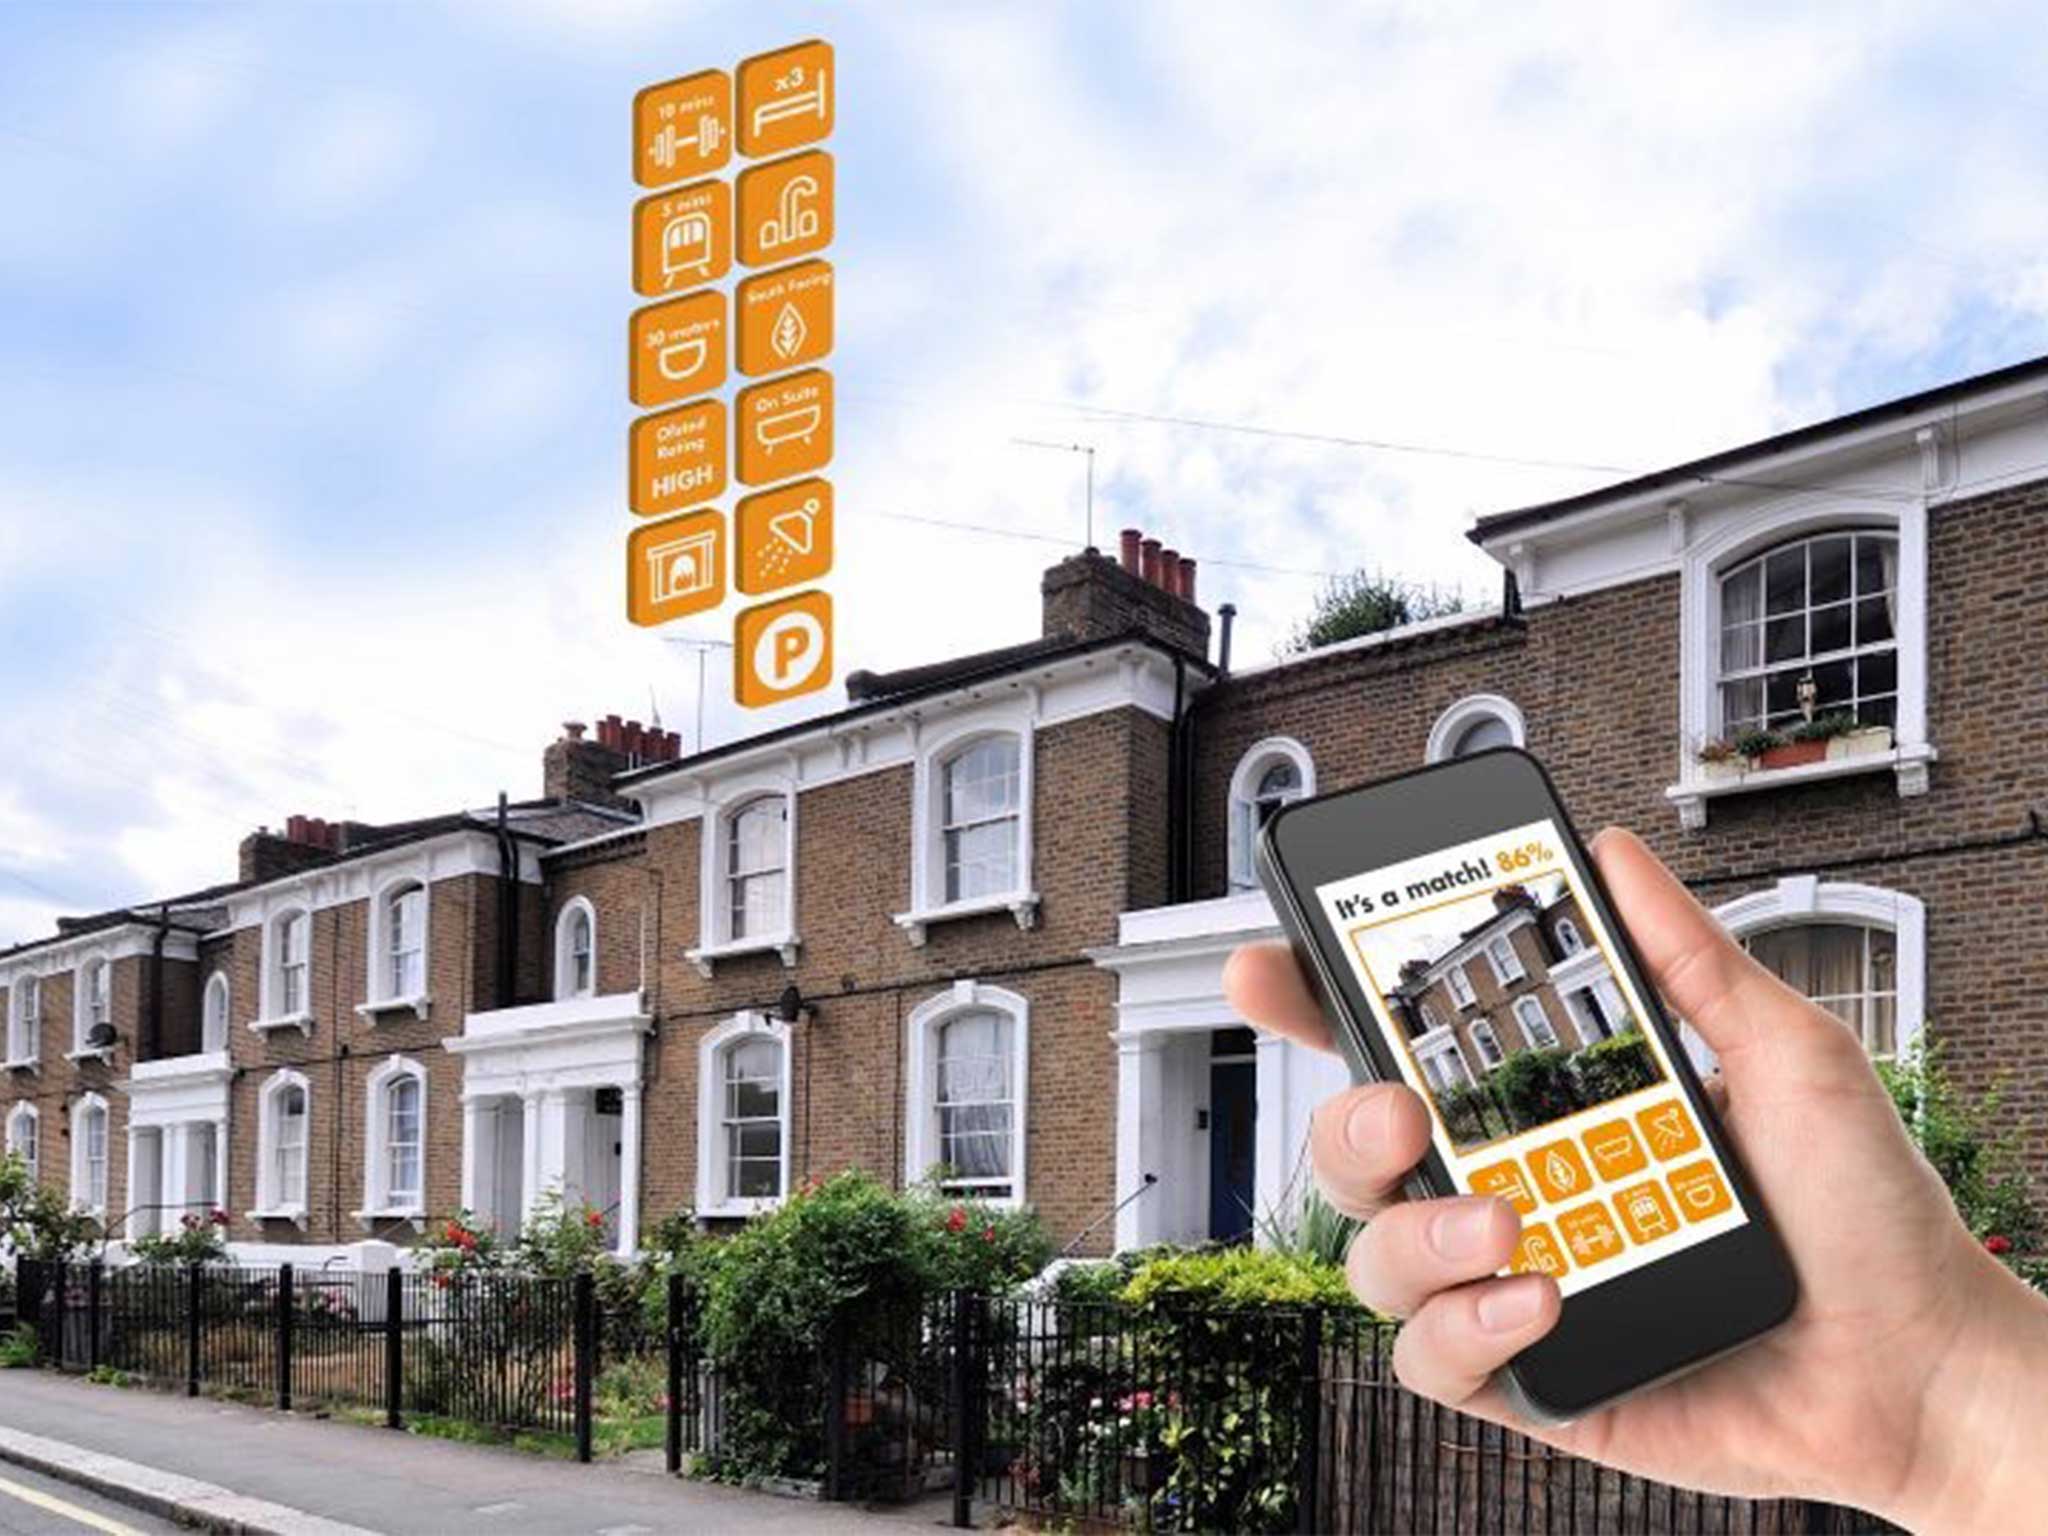 Clever stuff: invisible beacons inside the property will replace For Sale boards. If the house for sale matches your particular criteria the details will be uploaded to your mobile device as you pass by